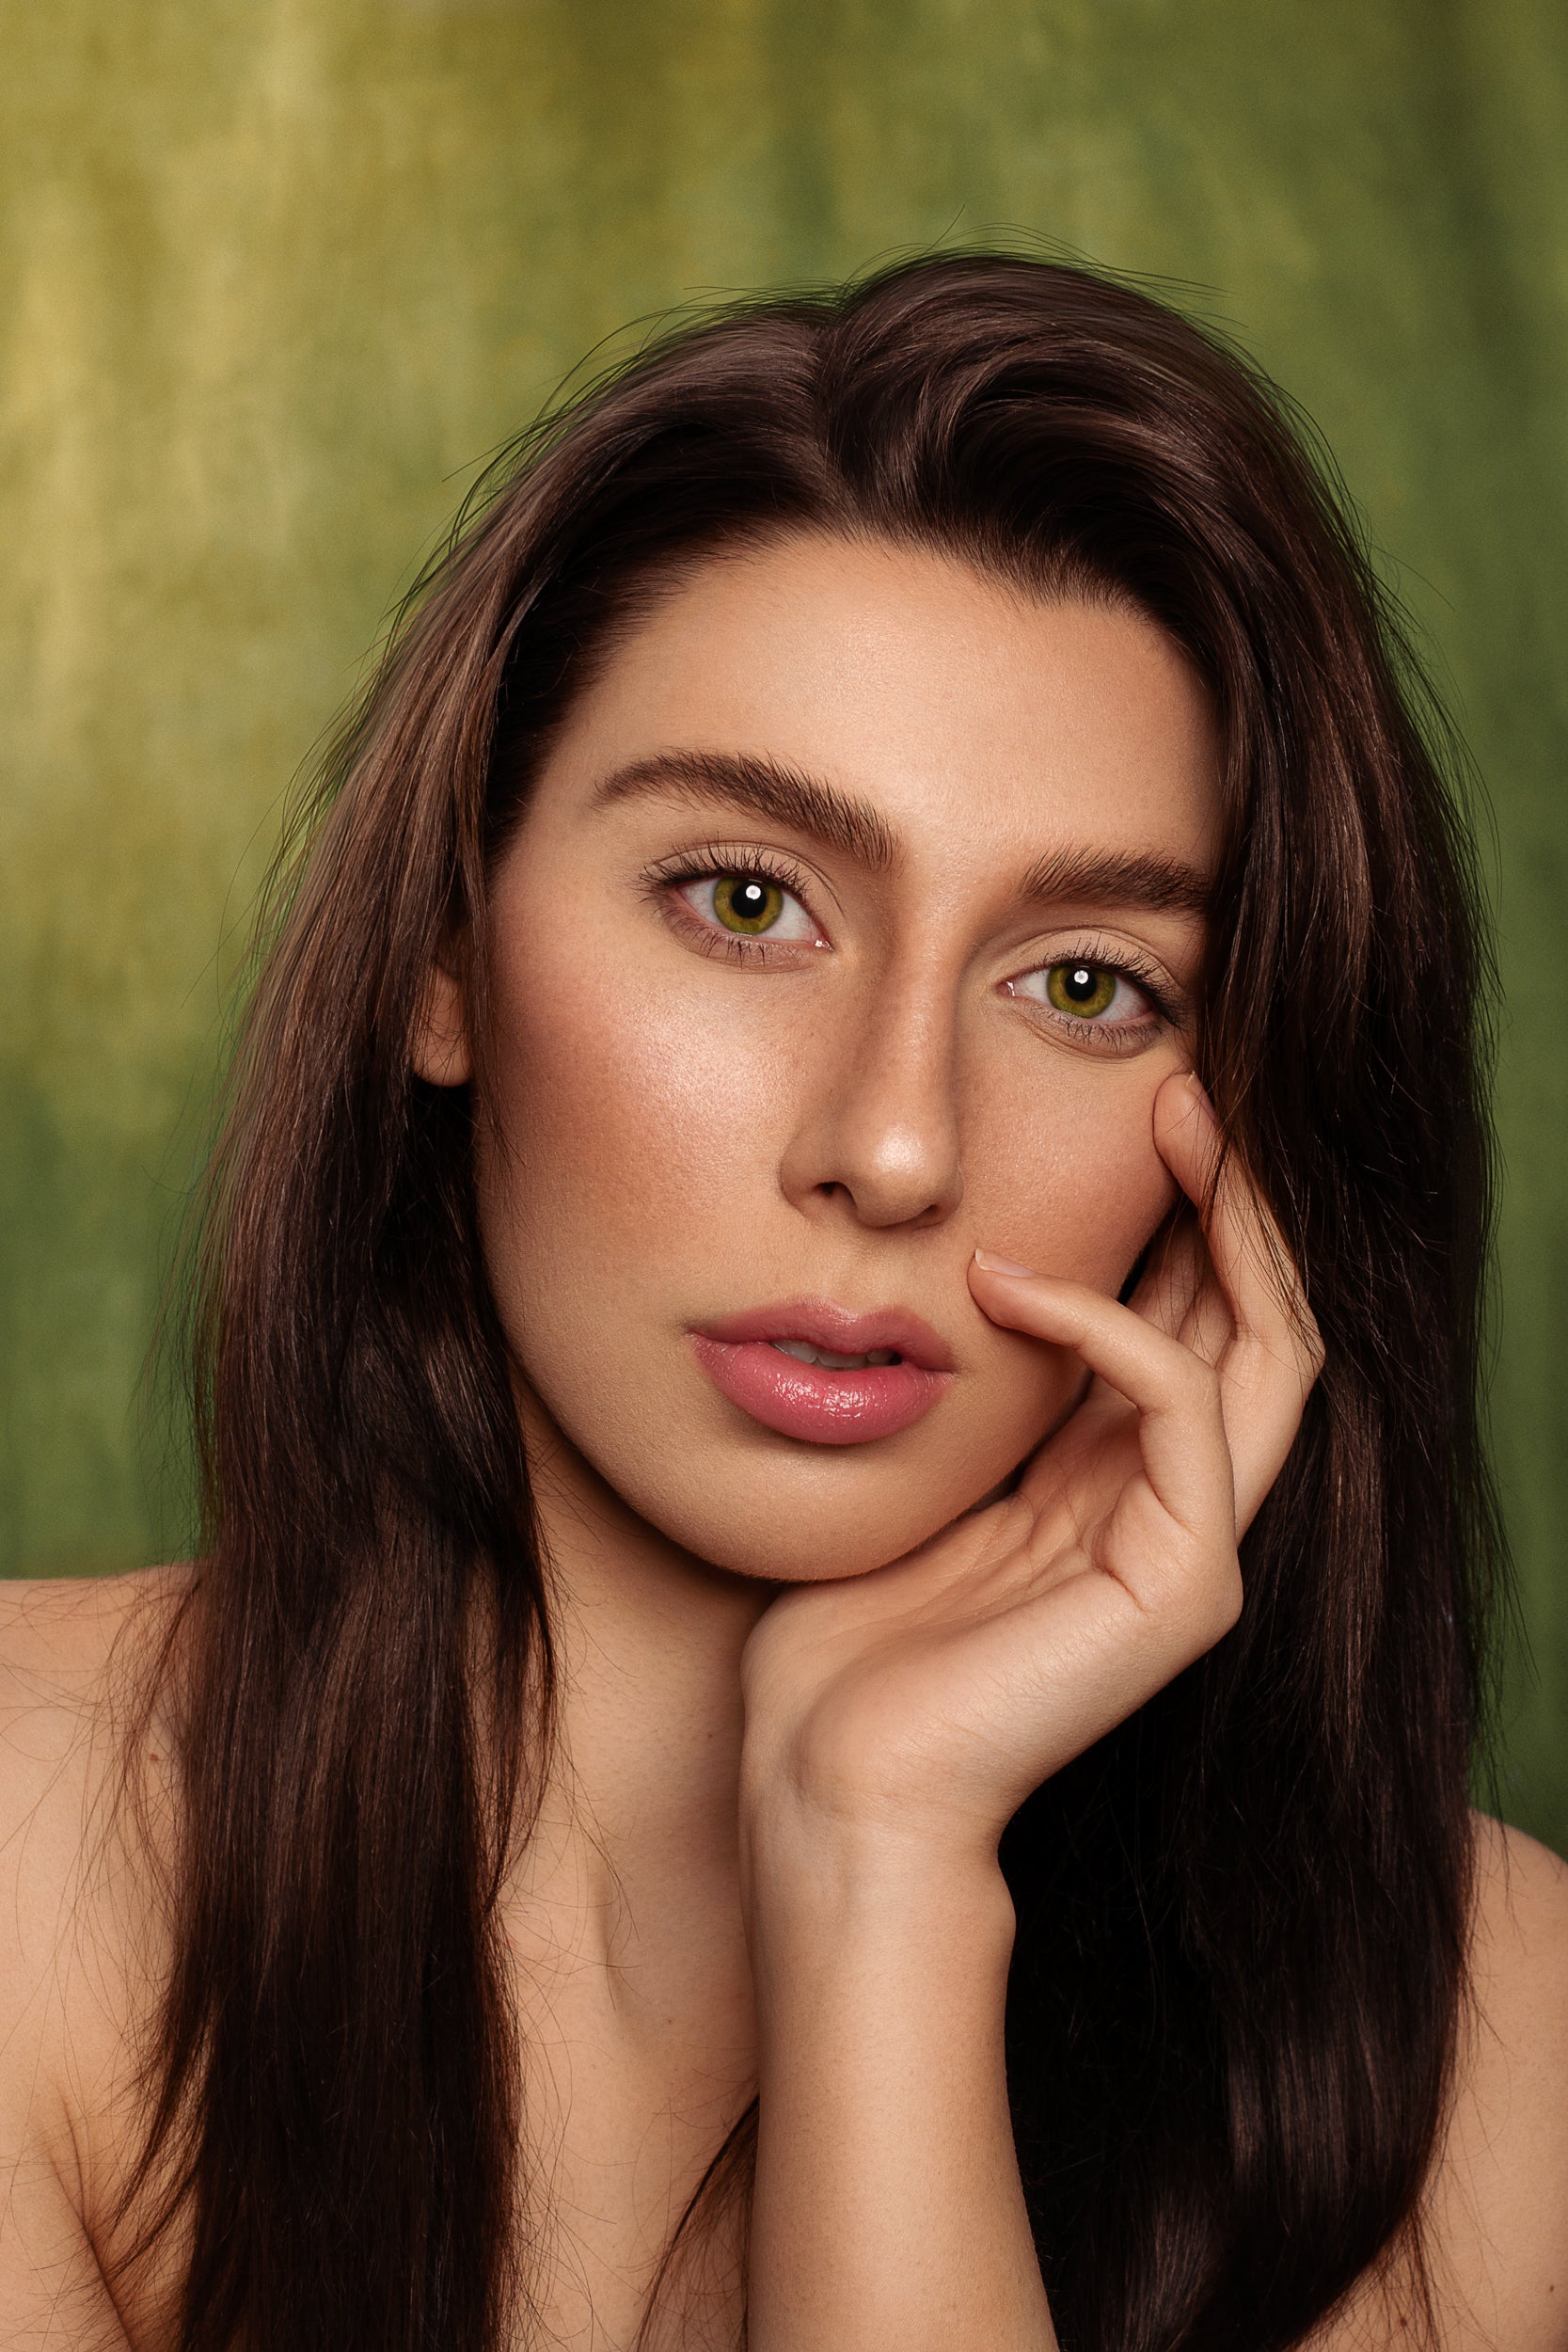 Portrait of a woman with long brown hair and striking green eyes, gently touching her face against a textured backdrop of Kate Sweep Green Abstract Backdrop for Photography. She has natural makeup and a serene expression.